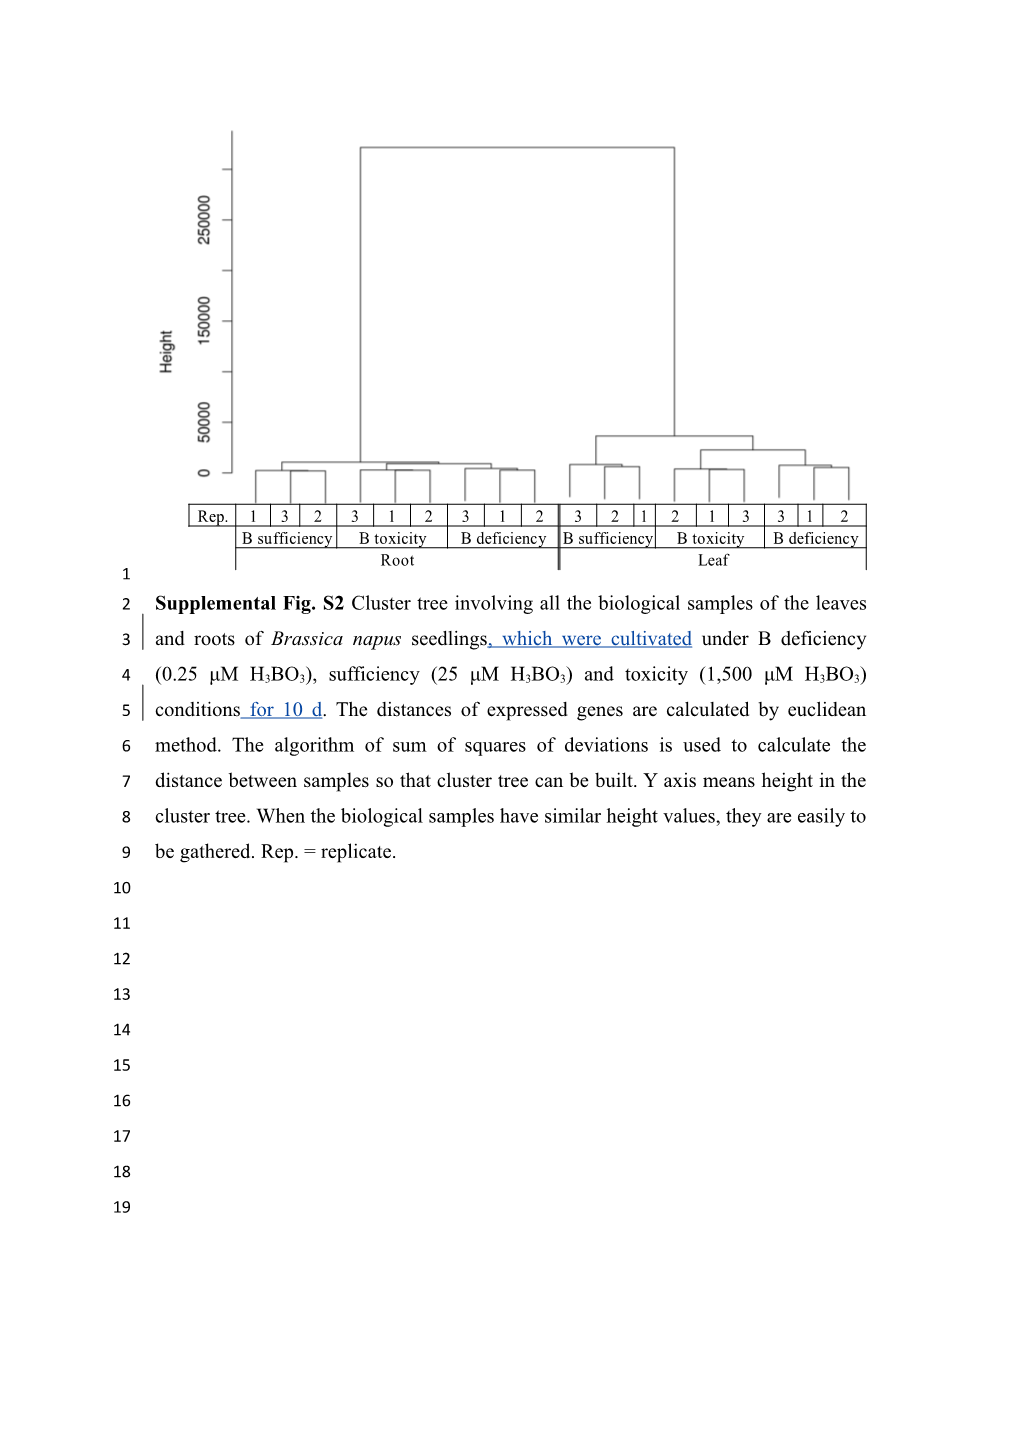 Supplemental Fig. S 2Cluster Tree Involving All the Biological Samples of the Leaves And